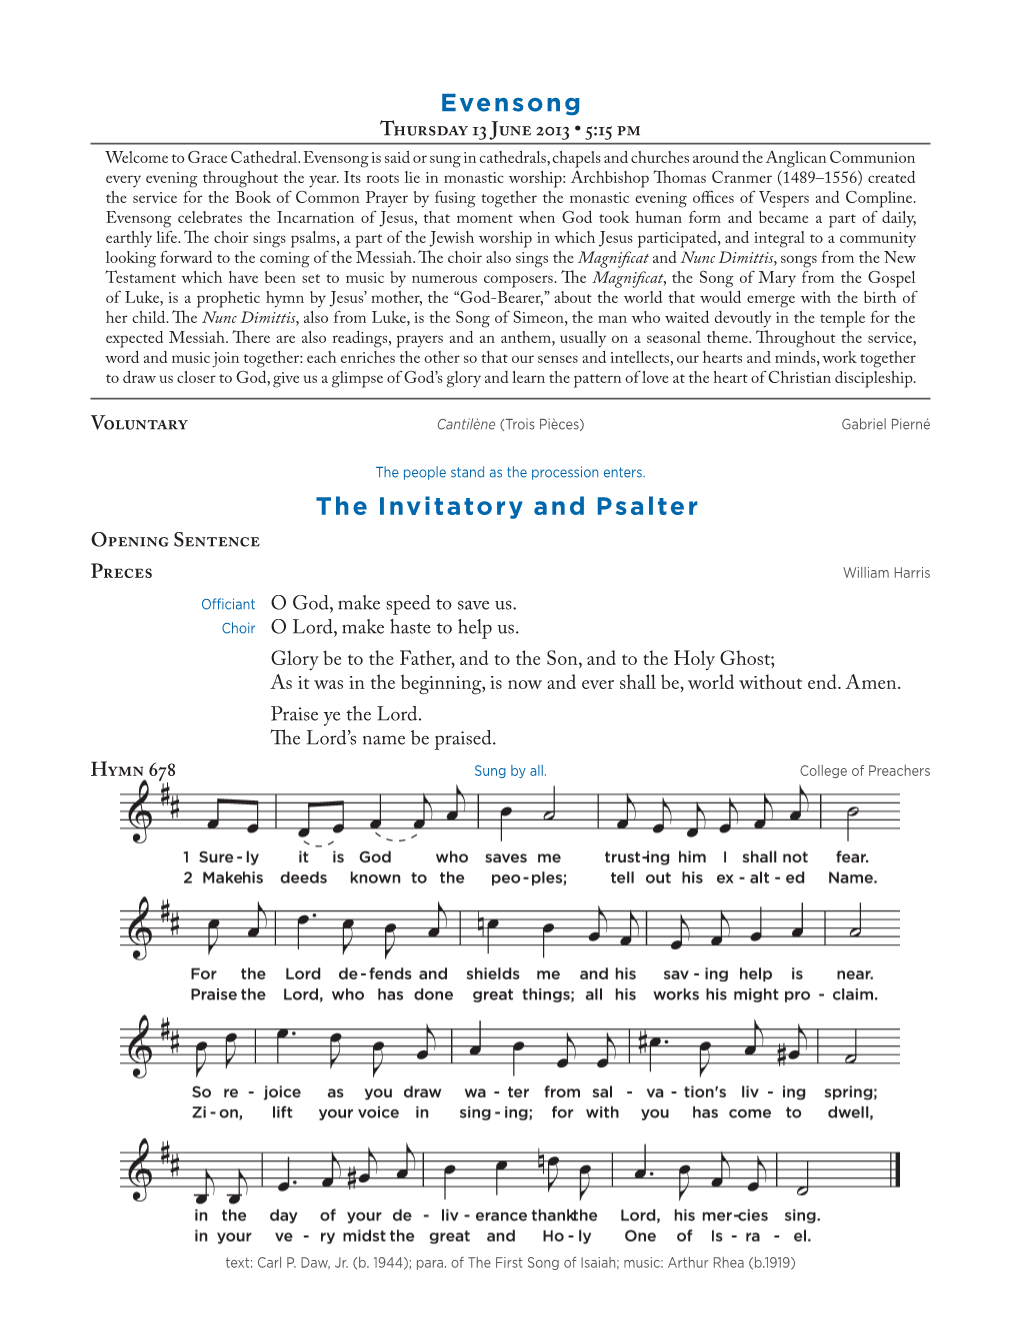 Evensong the Invitatory and Psalter